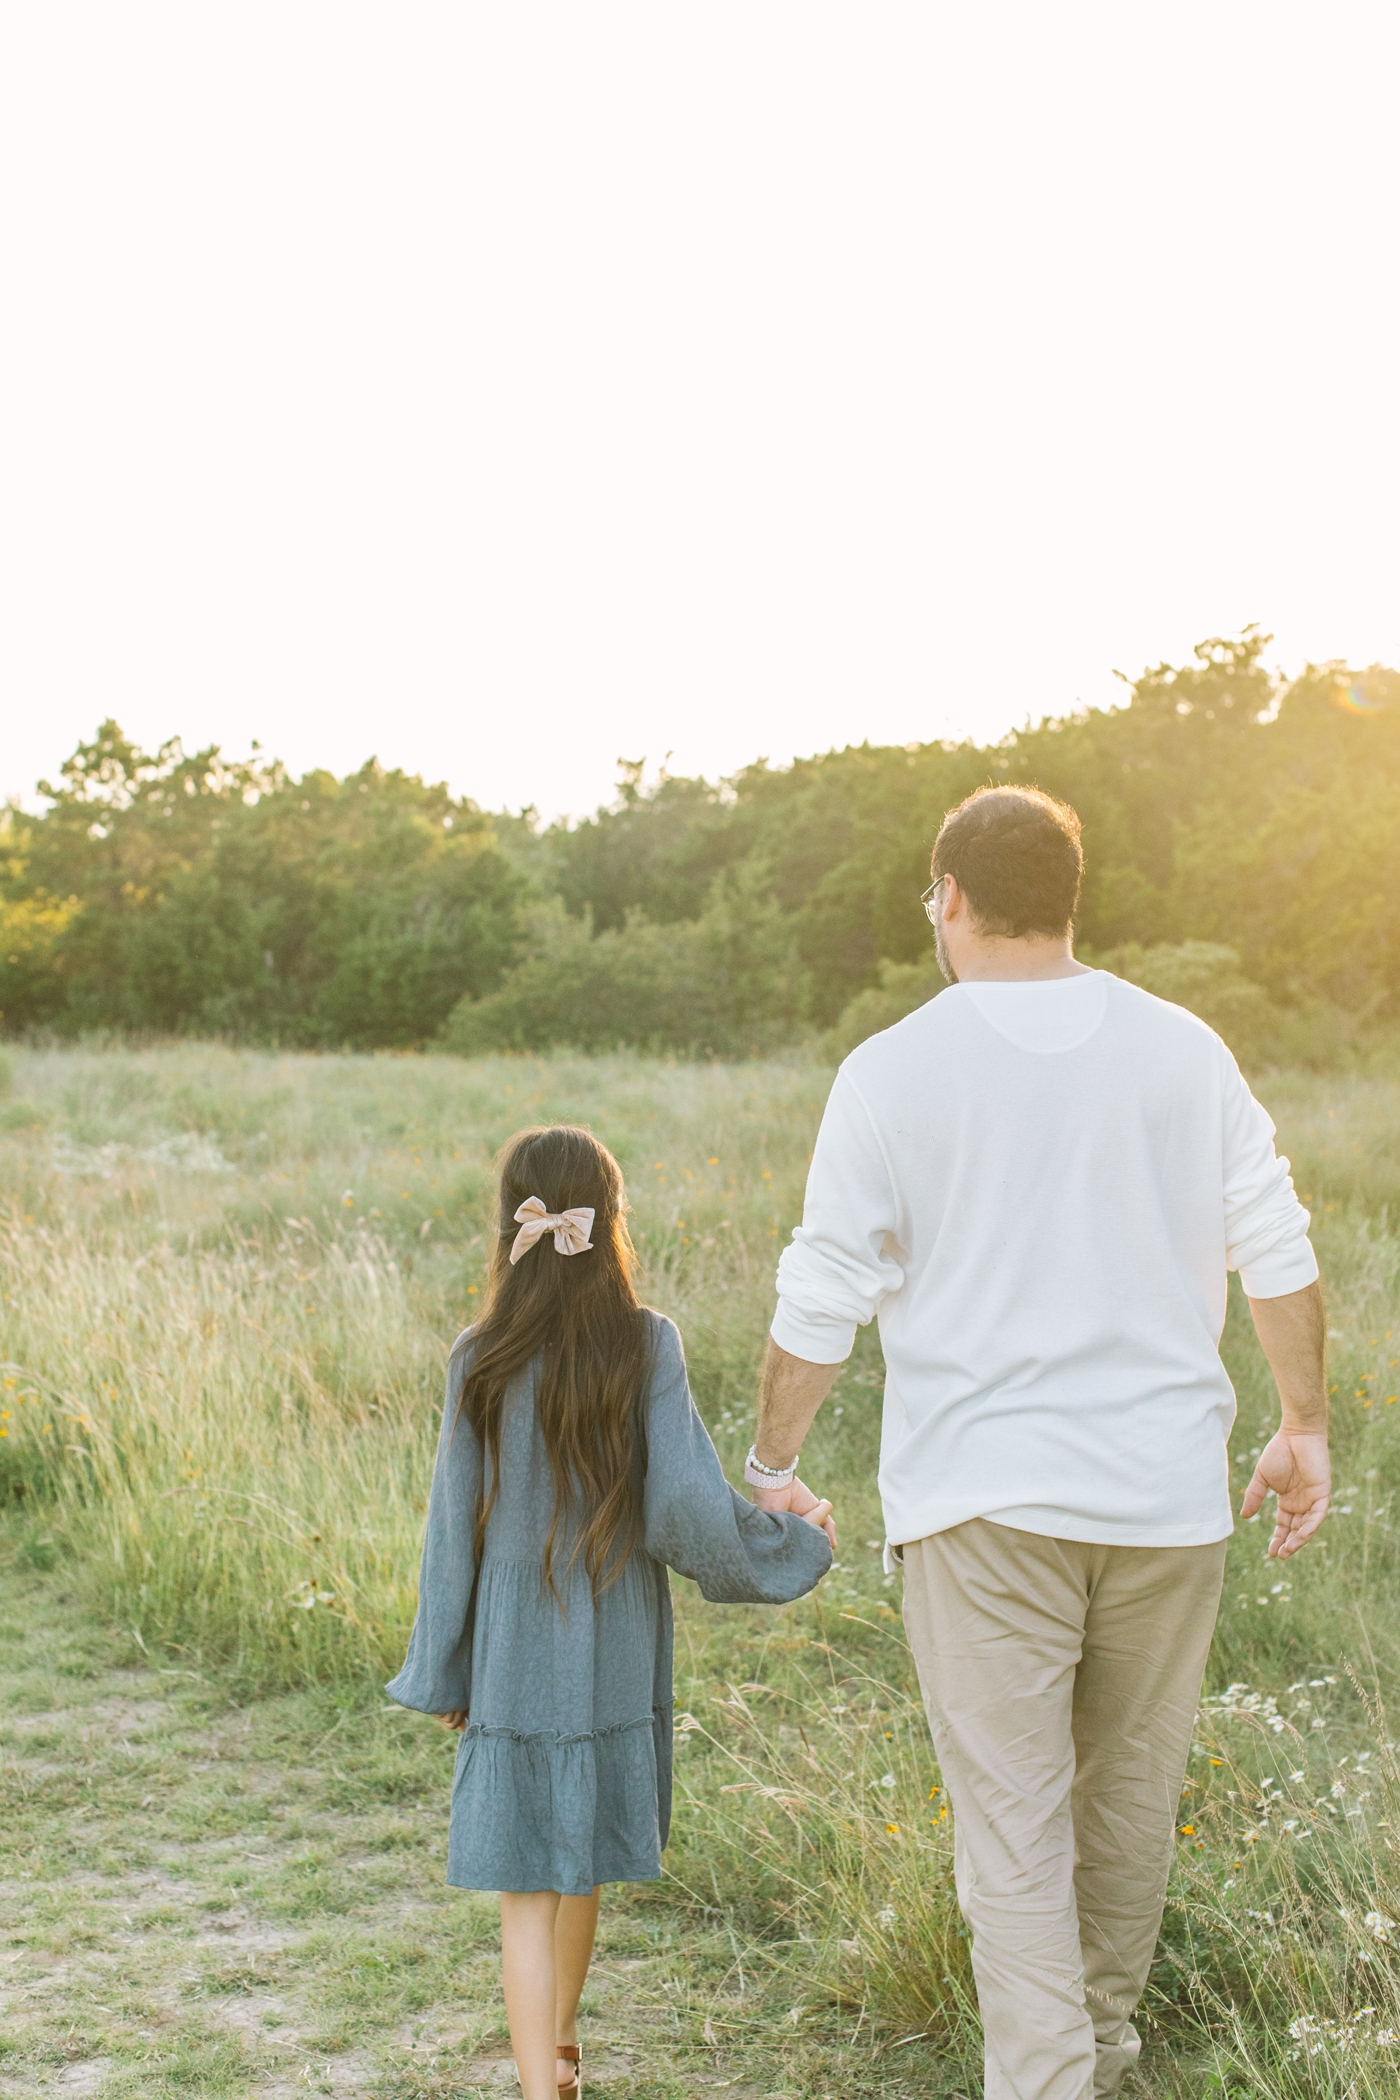 Dad holding daughter's hand and walking in field during family session in Austin, TX. Photo by Sana Ahmed Photography.